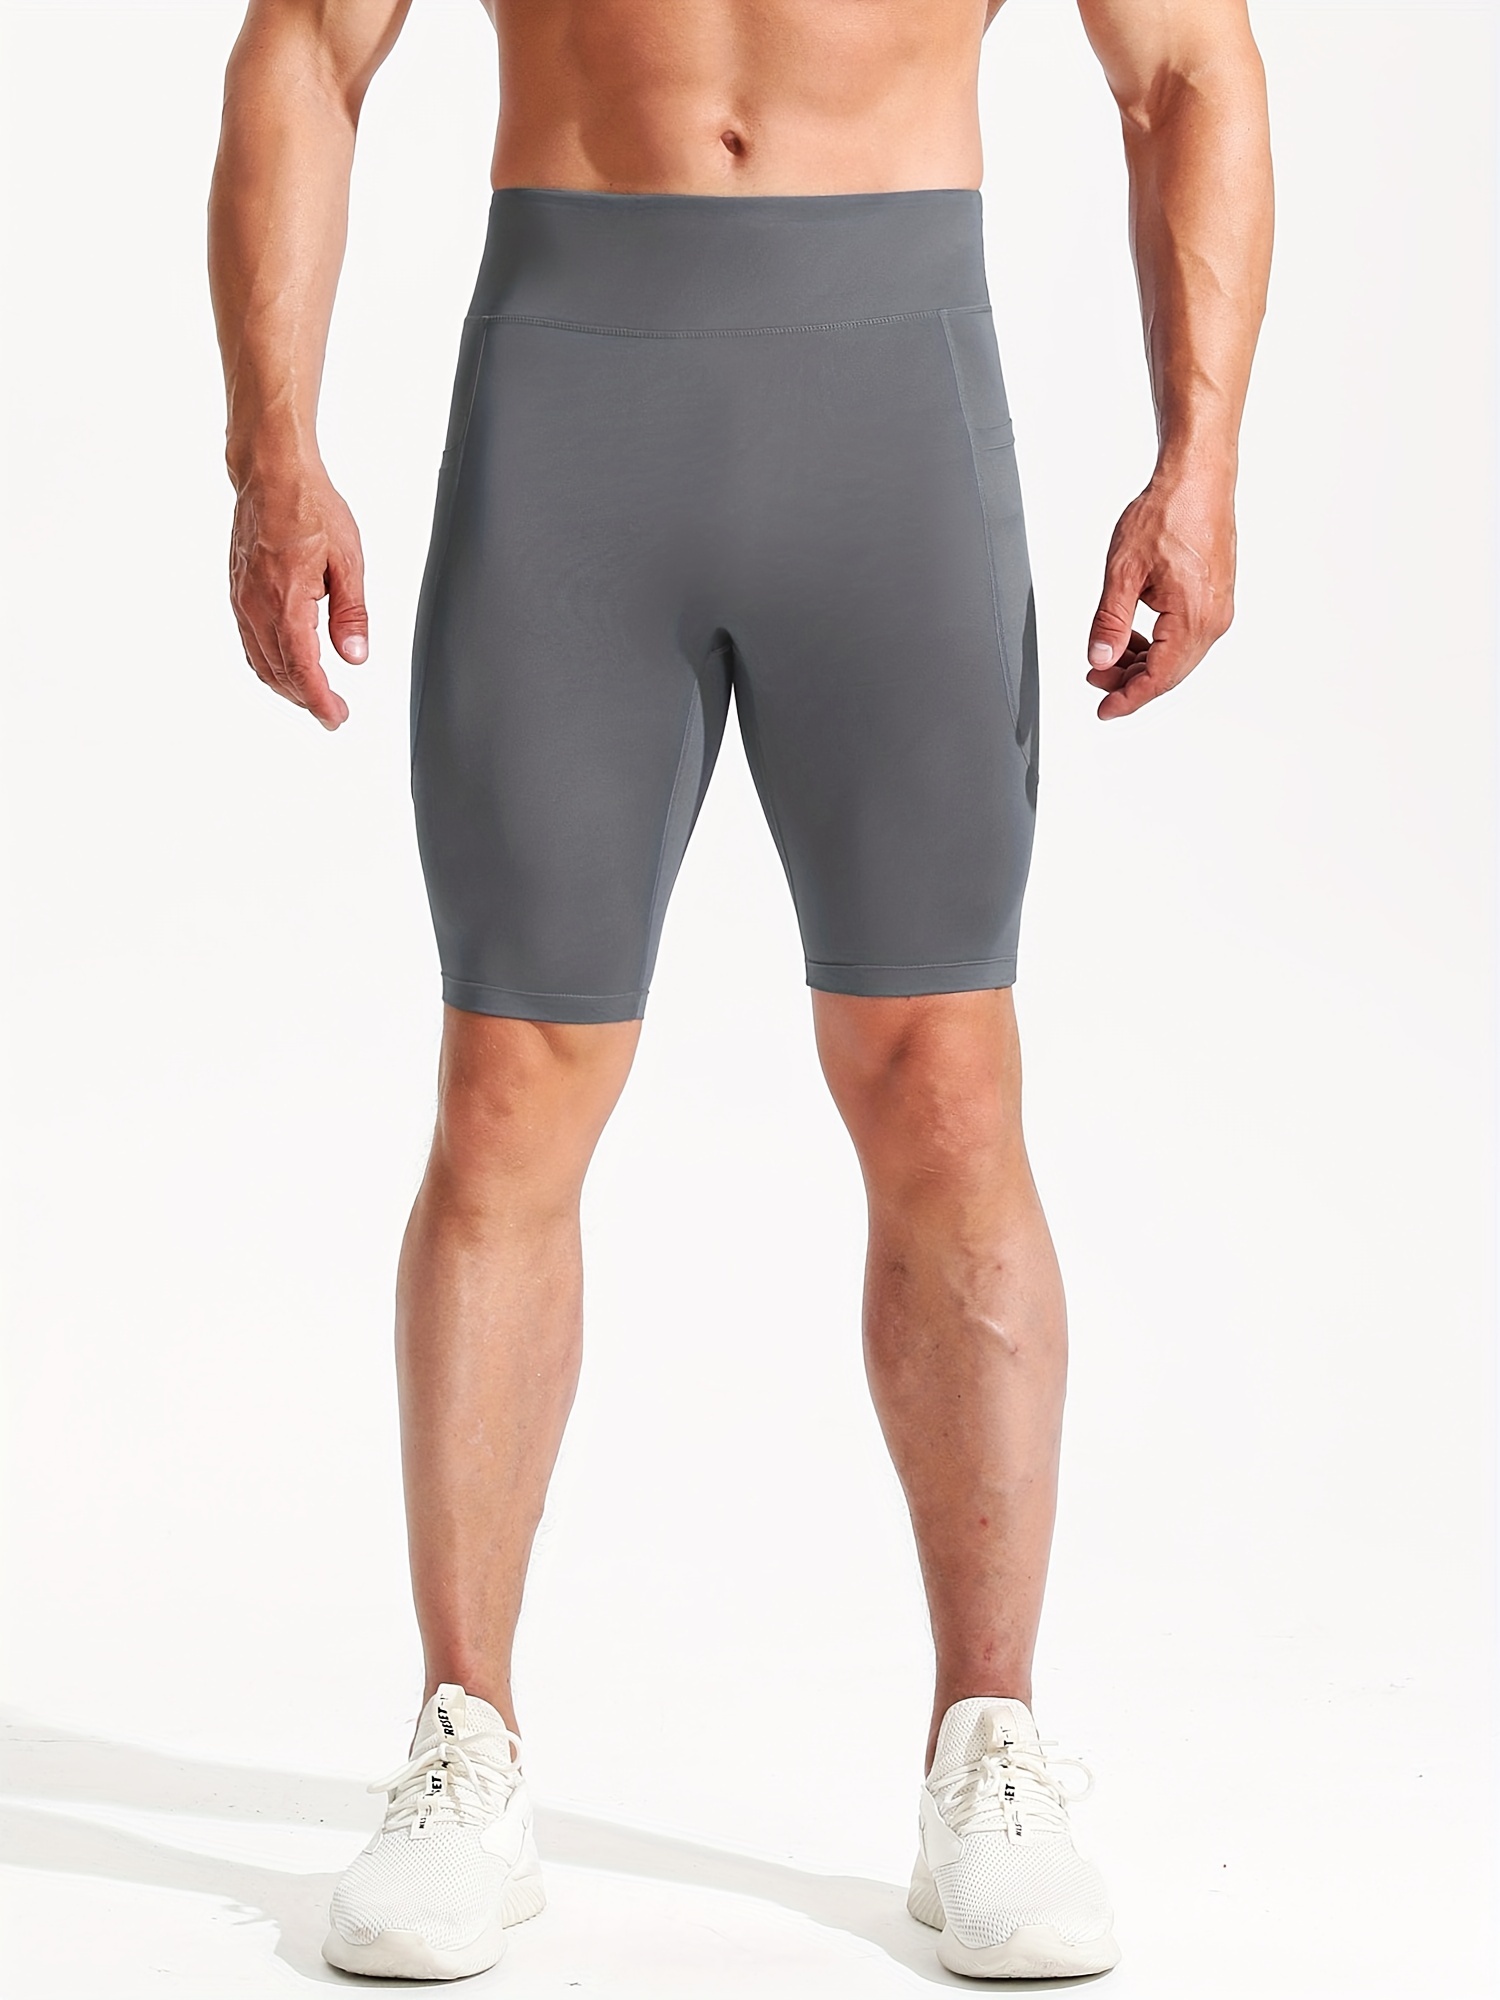 Mens Compression Running Shorts With Pockets With Phone Pocket 2021 Gym  Wear, Under Base Layer, Athletic Solid Tights Size 08 From Sports_goods88,  $14.77